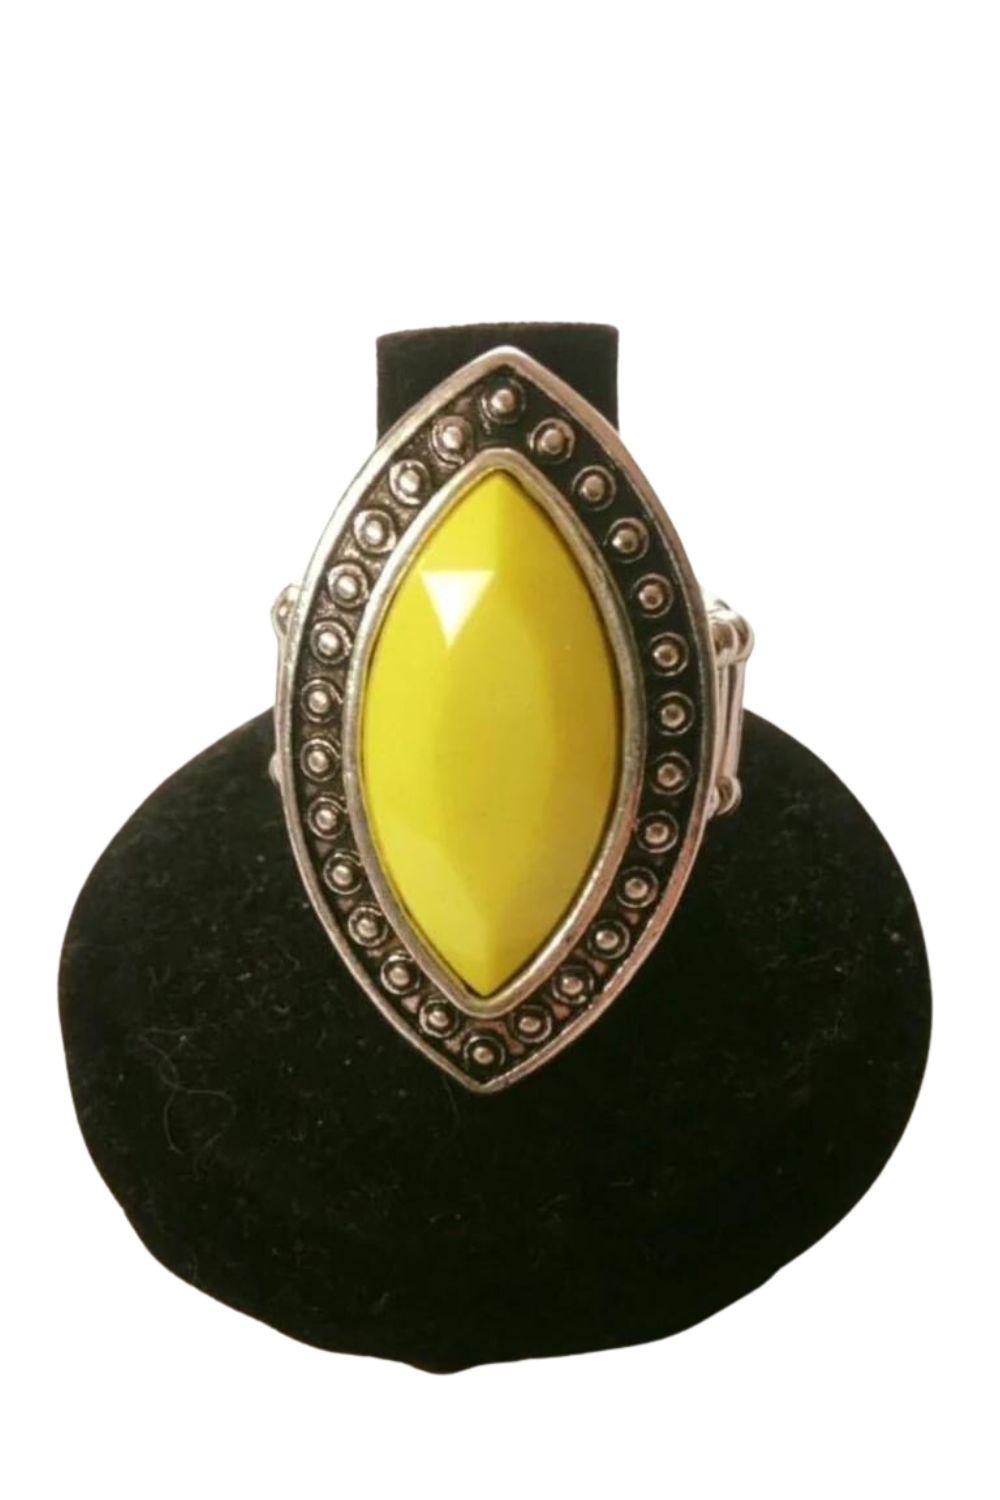 Serenely Sahara Yellow Ring - Paparazzi Accessories- lightbox - CarasShop.com - $5 Jewelry by Cara Jewels